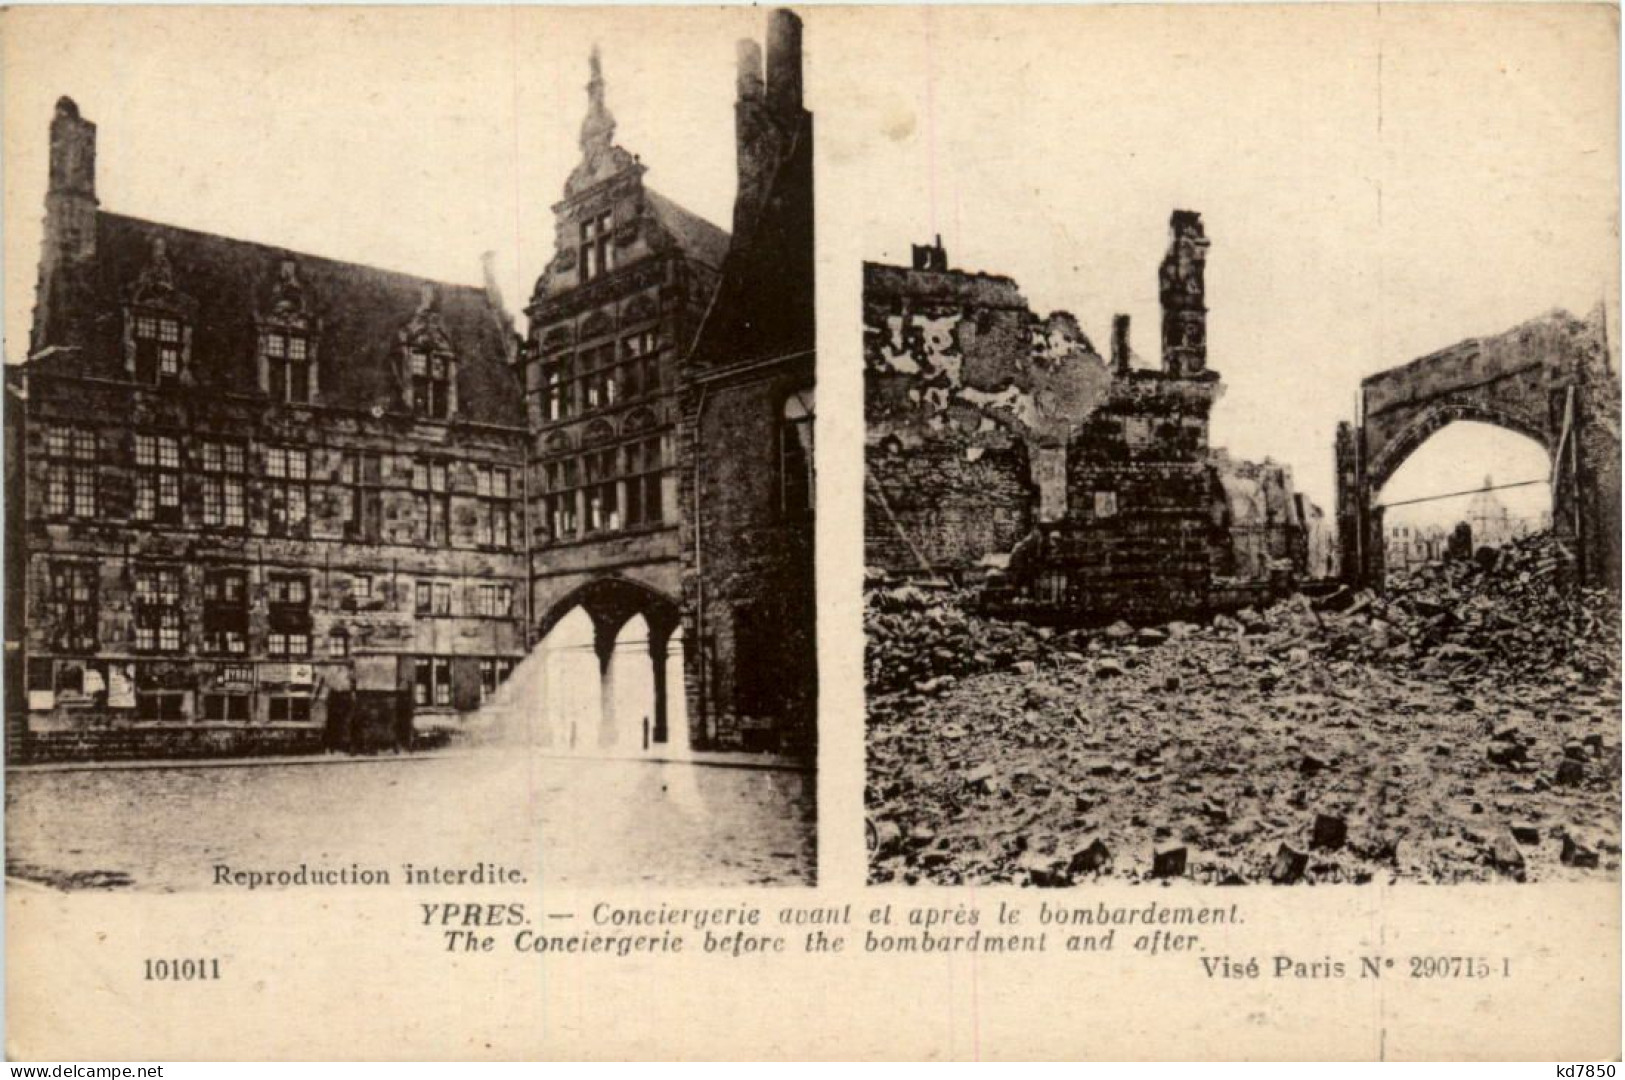 Ypres - Little Museum Before And After Bombardement - Ieper